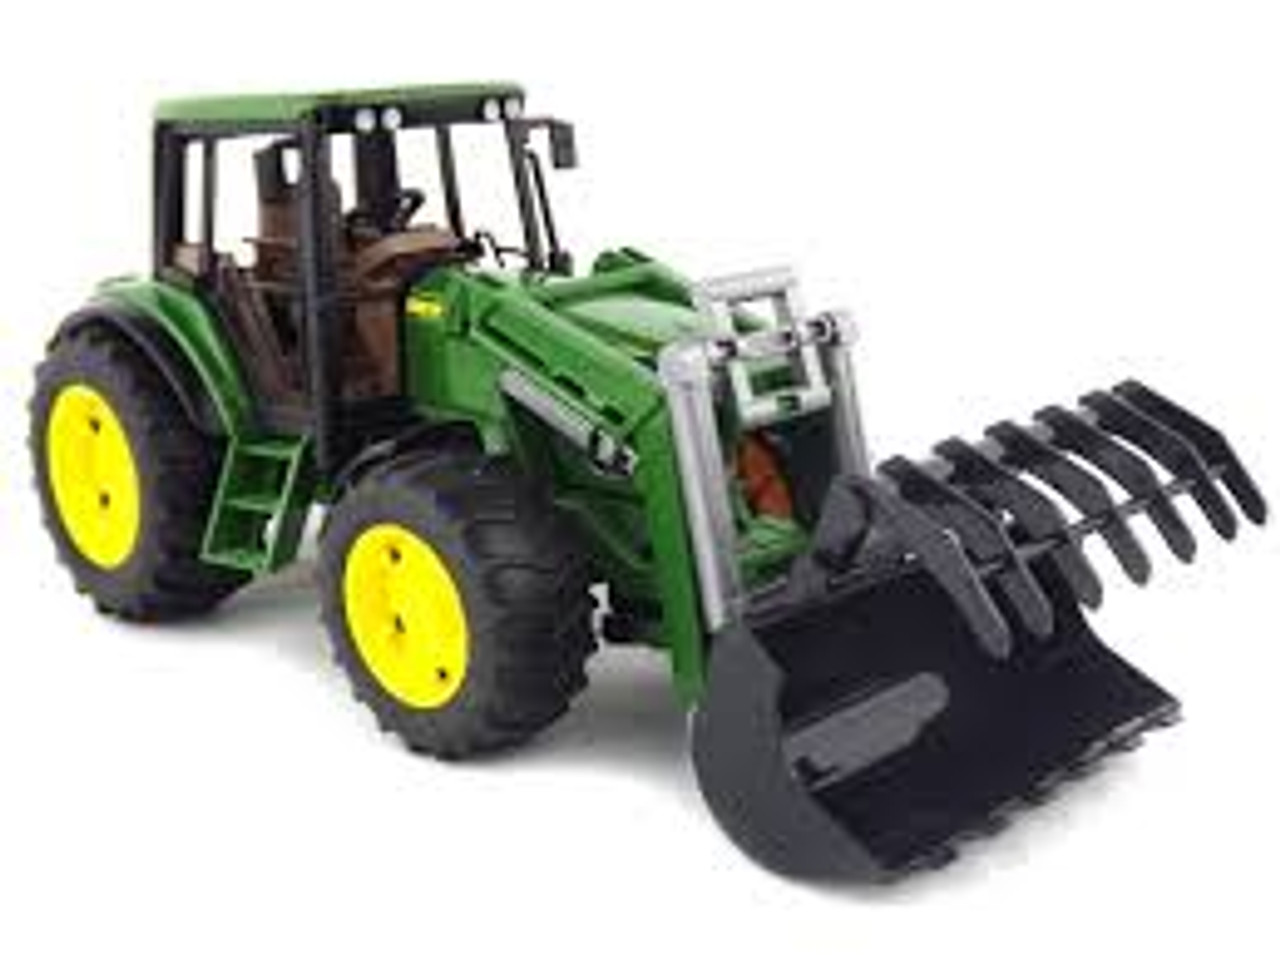 john deere tractor and loader toy